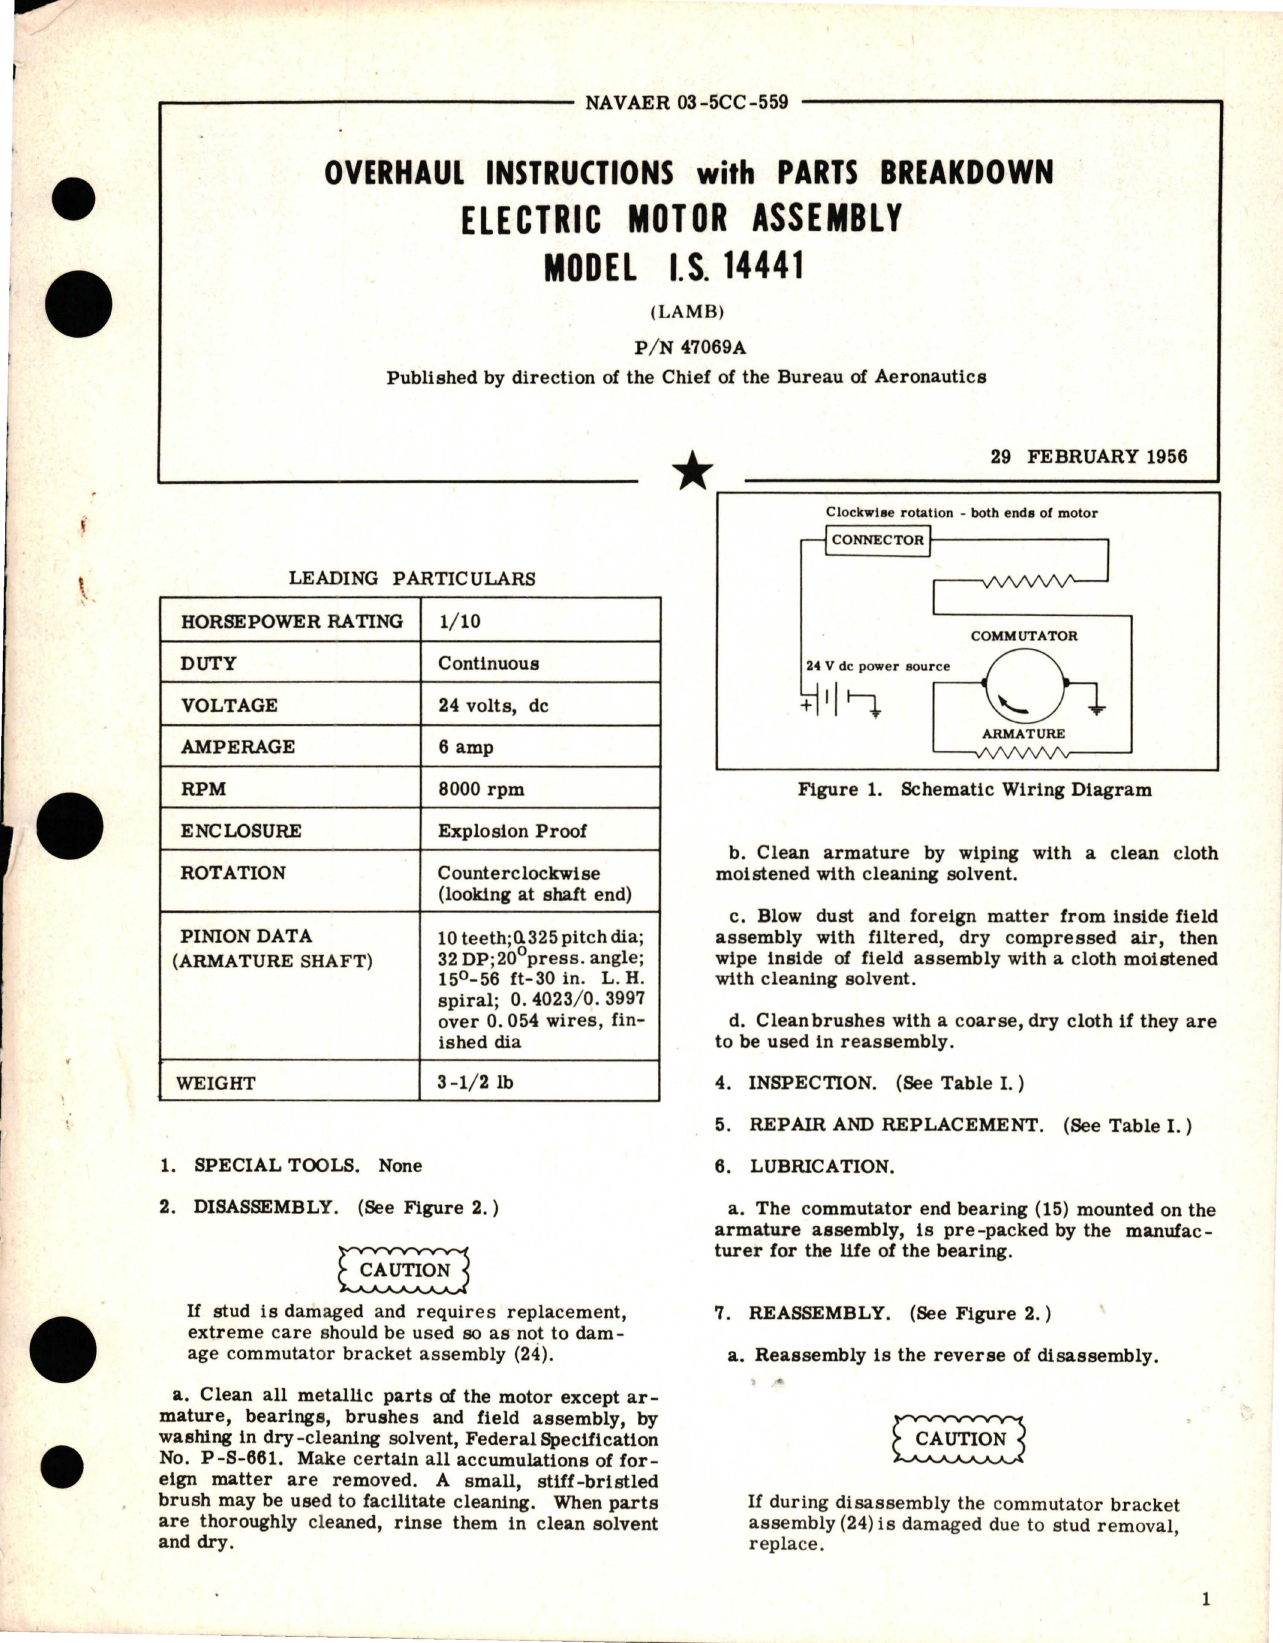 Sample page 1 from AirCorps Library document: Overhaul Instructions with Parts Breakdown for Electric Motor Assembly - Model IS 14441